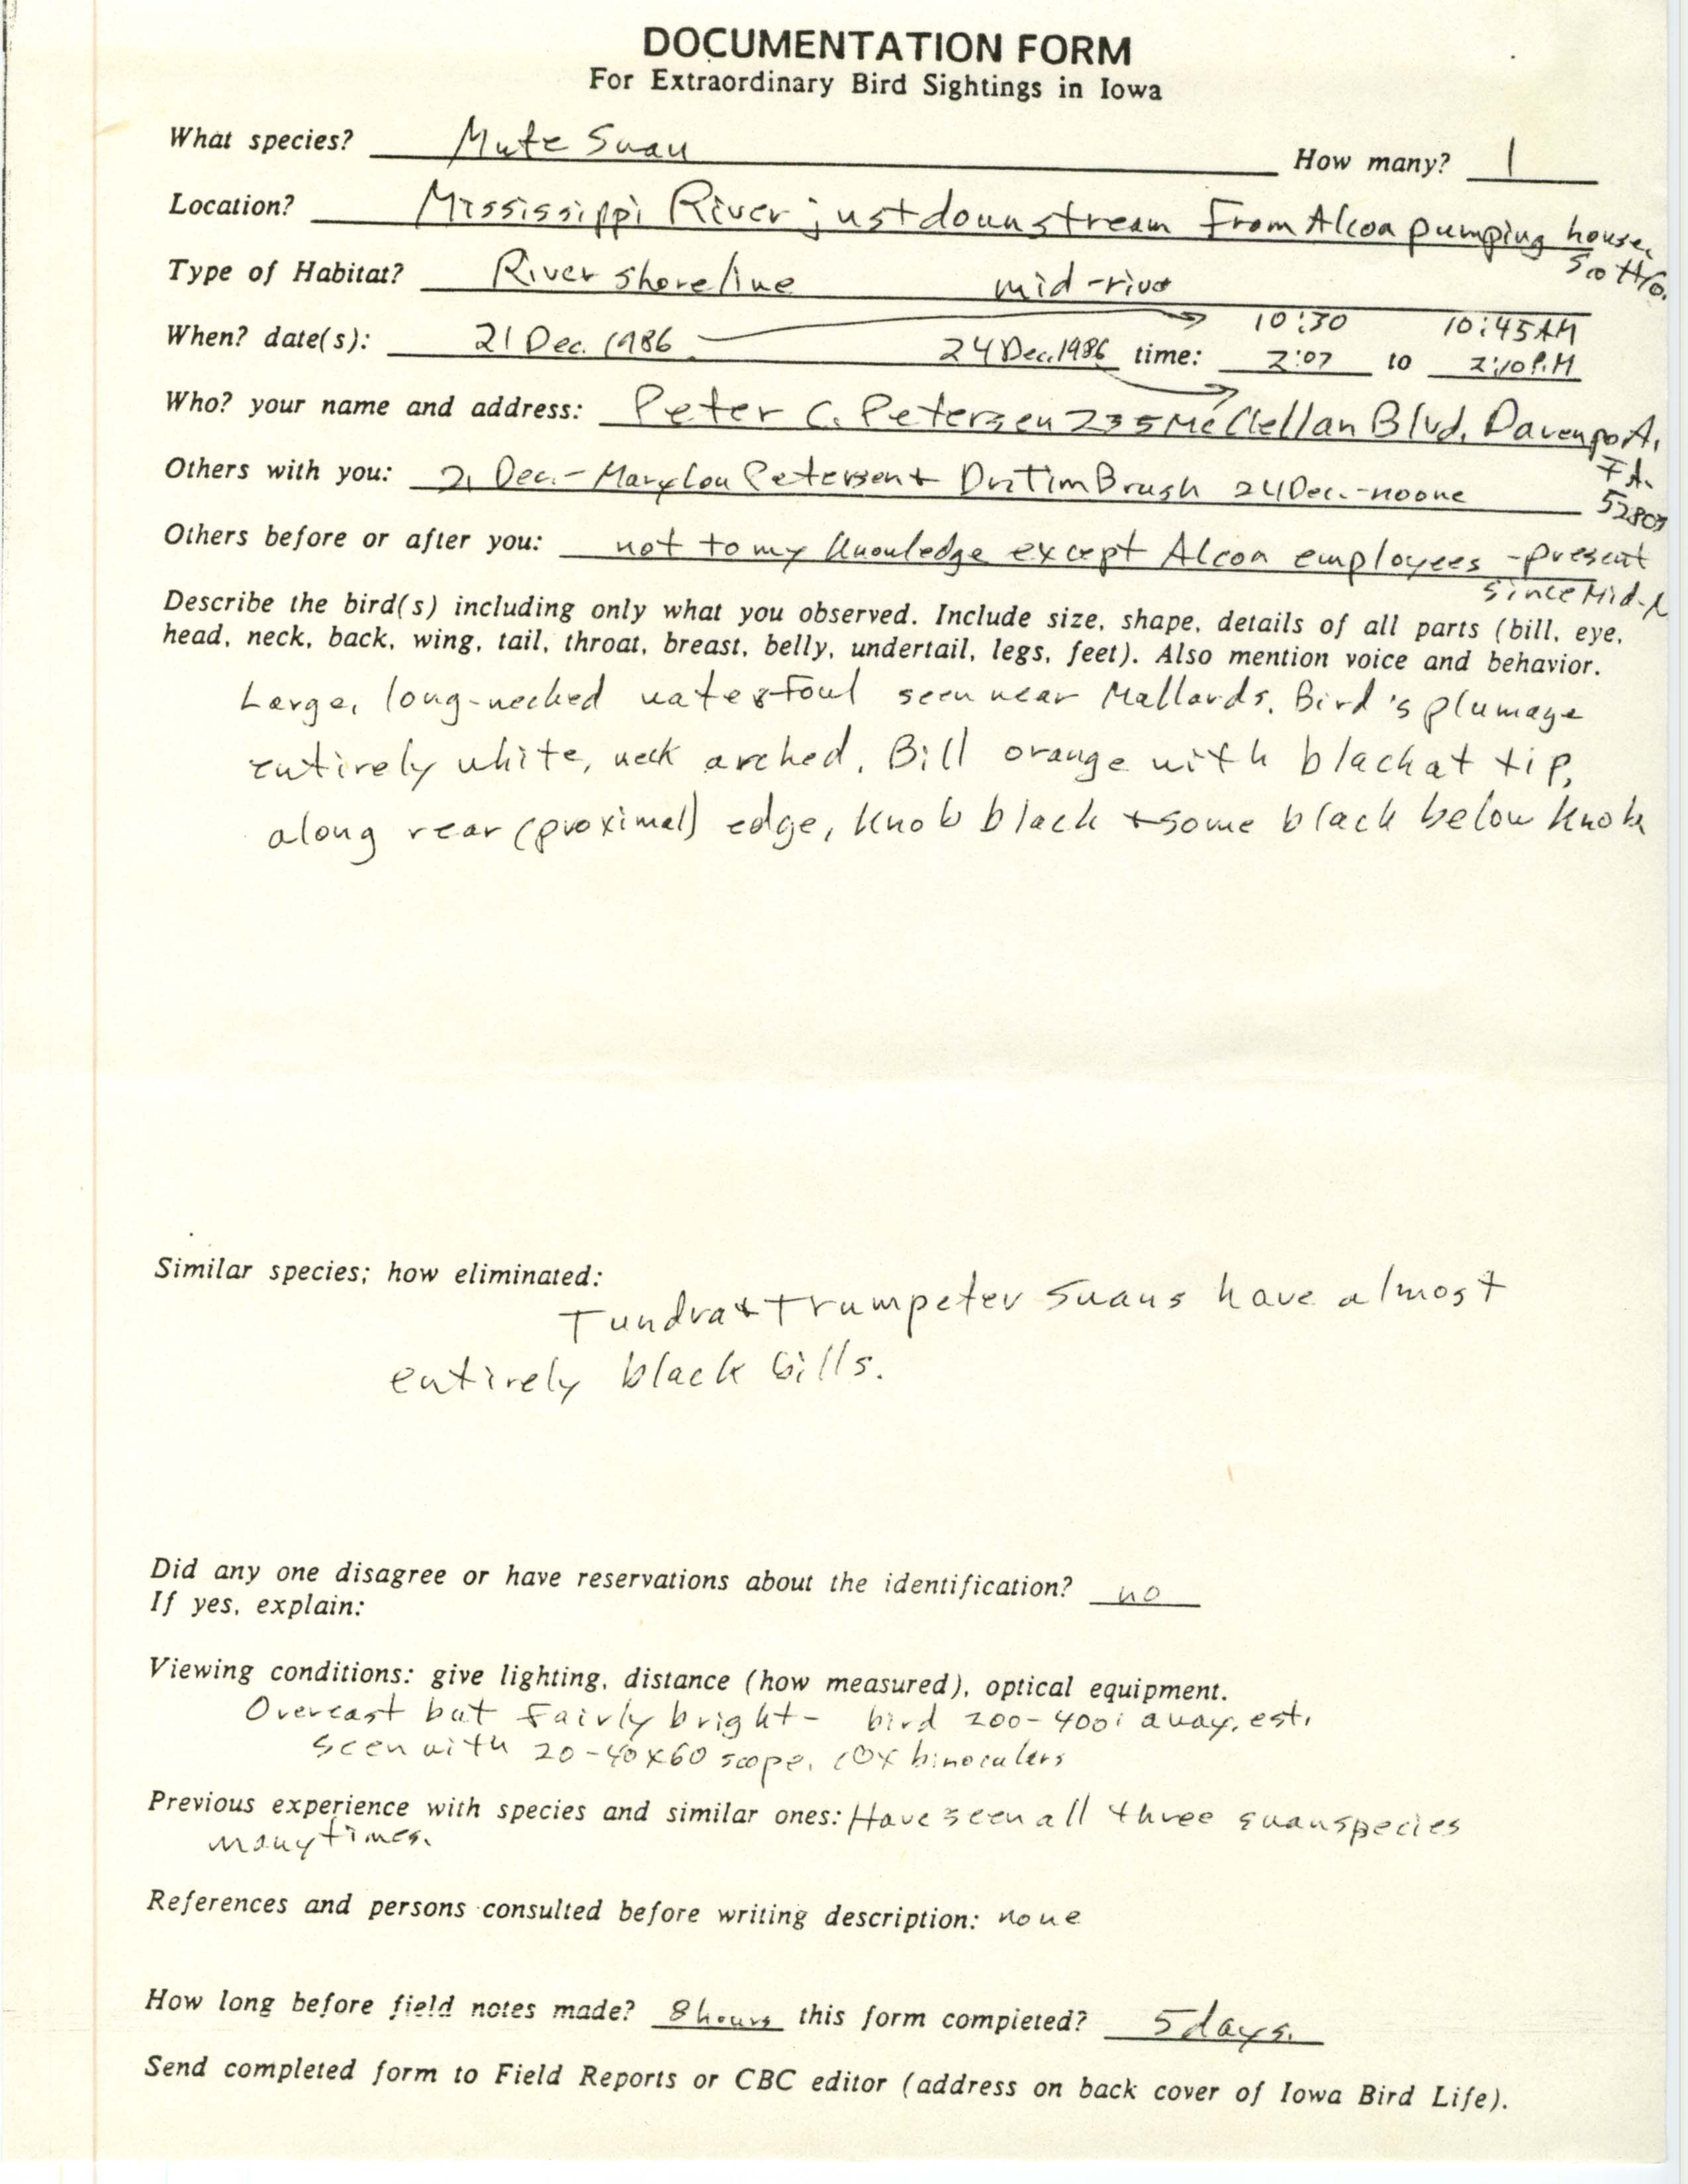 Rare bird documentation form for Mute Swan at Mississippi River in Scott County, 1986